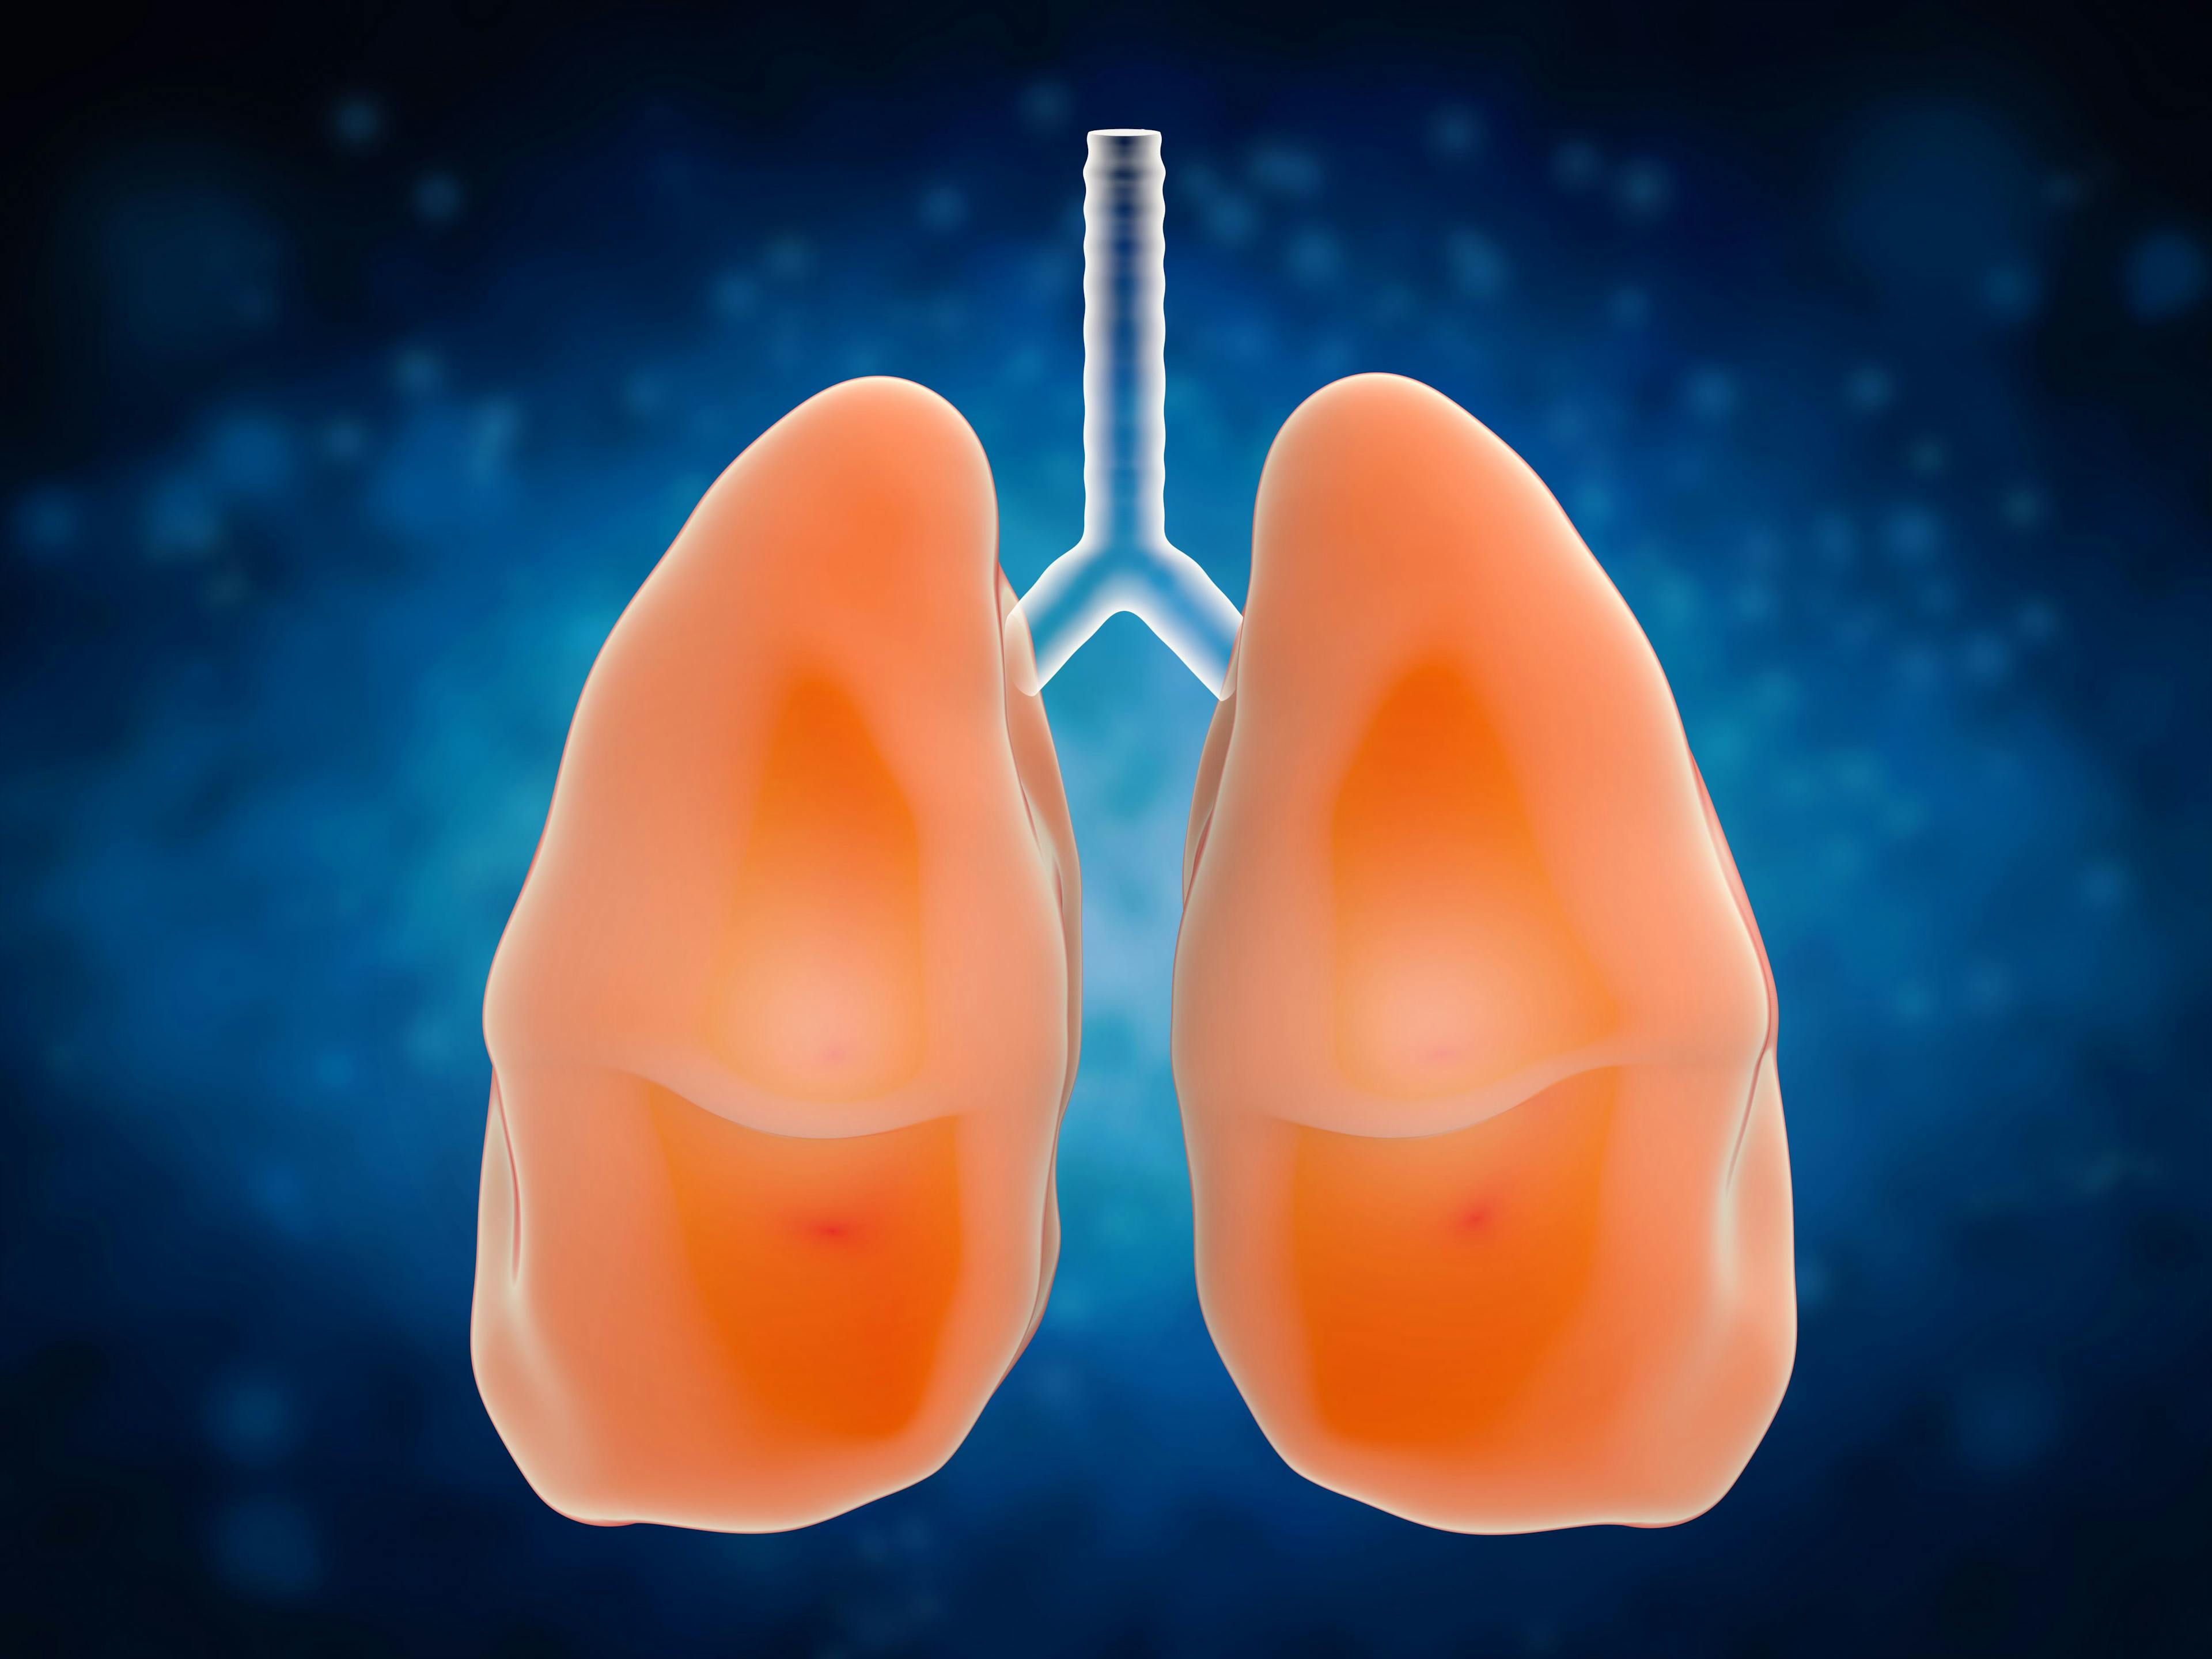 lungs 